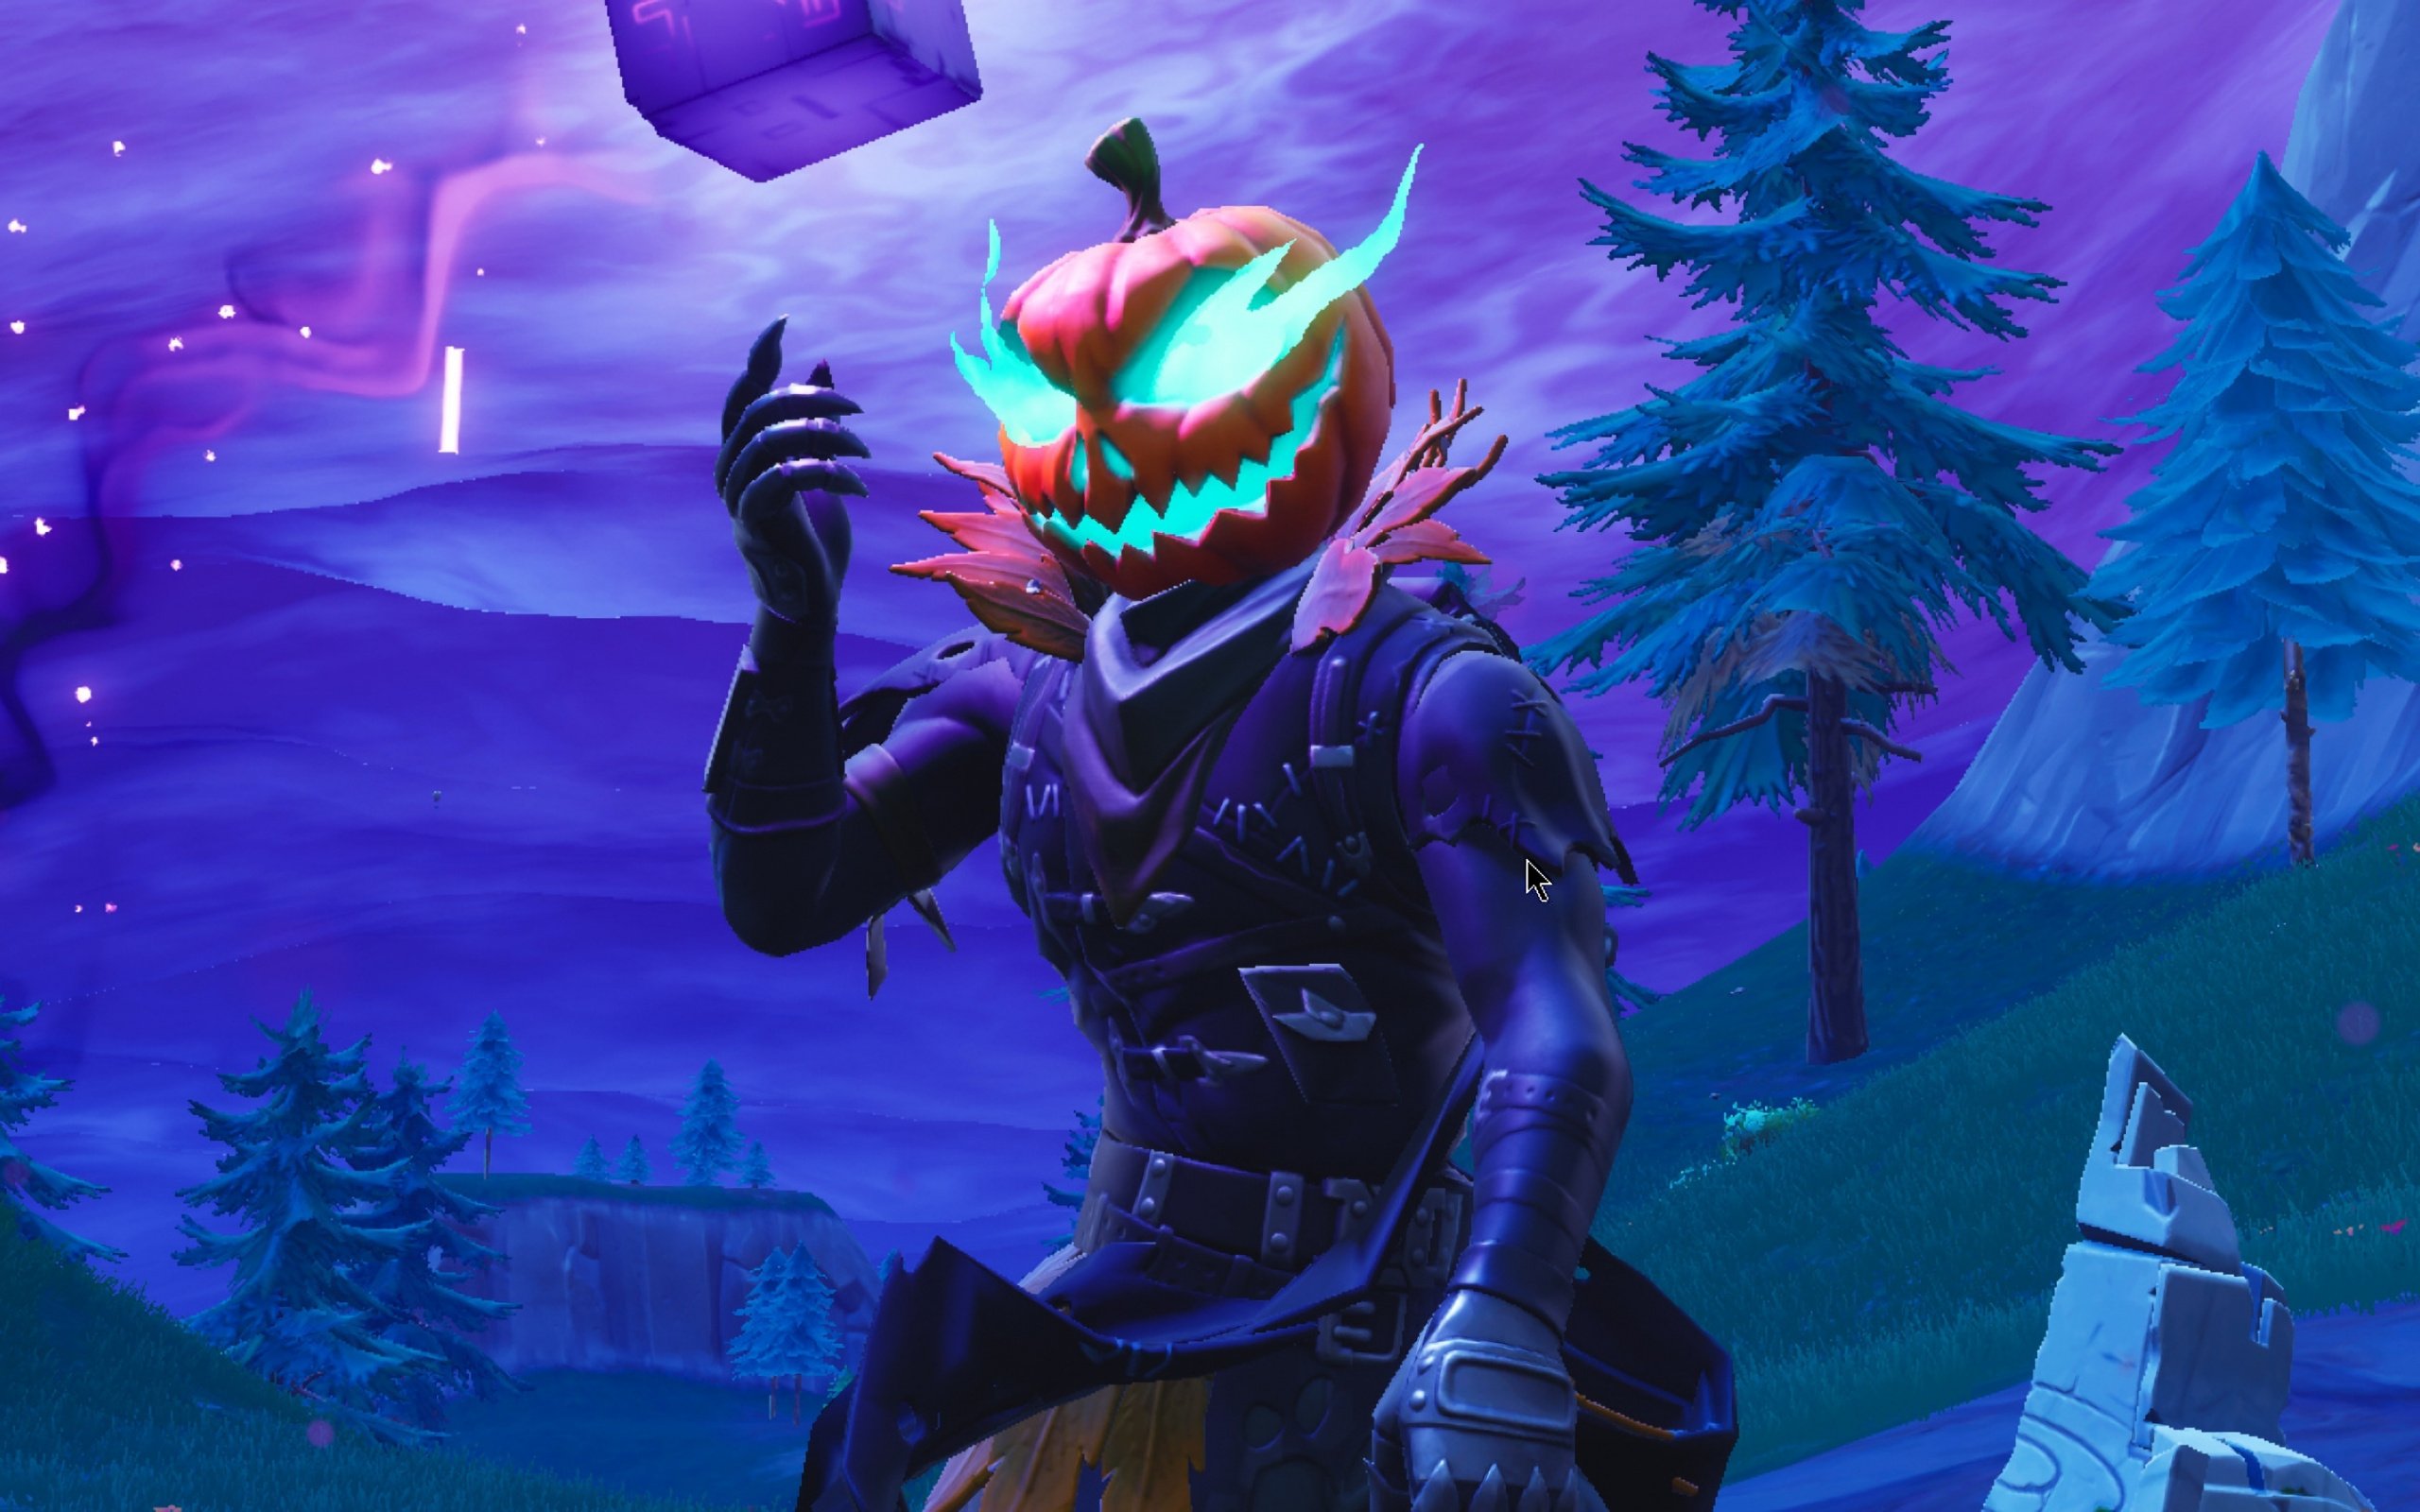 Hollowhead, darkness, Fortnite, charcaters, halloween, 2018 games, Fortnite ...